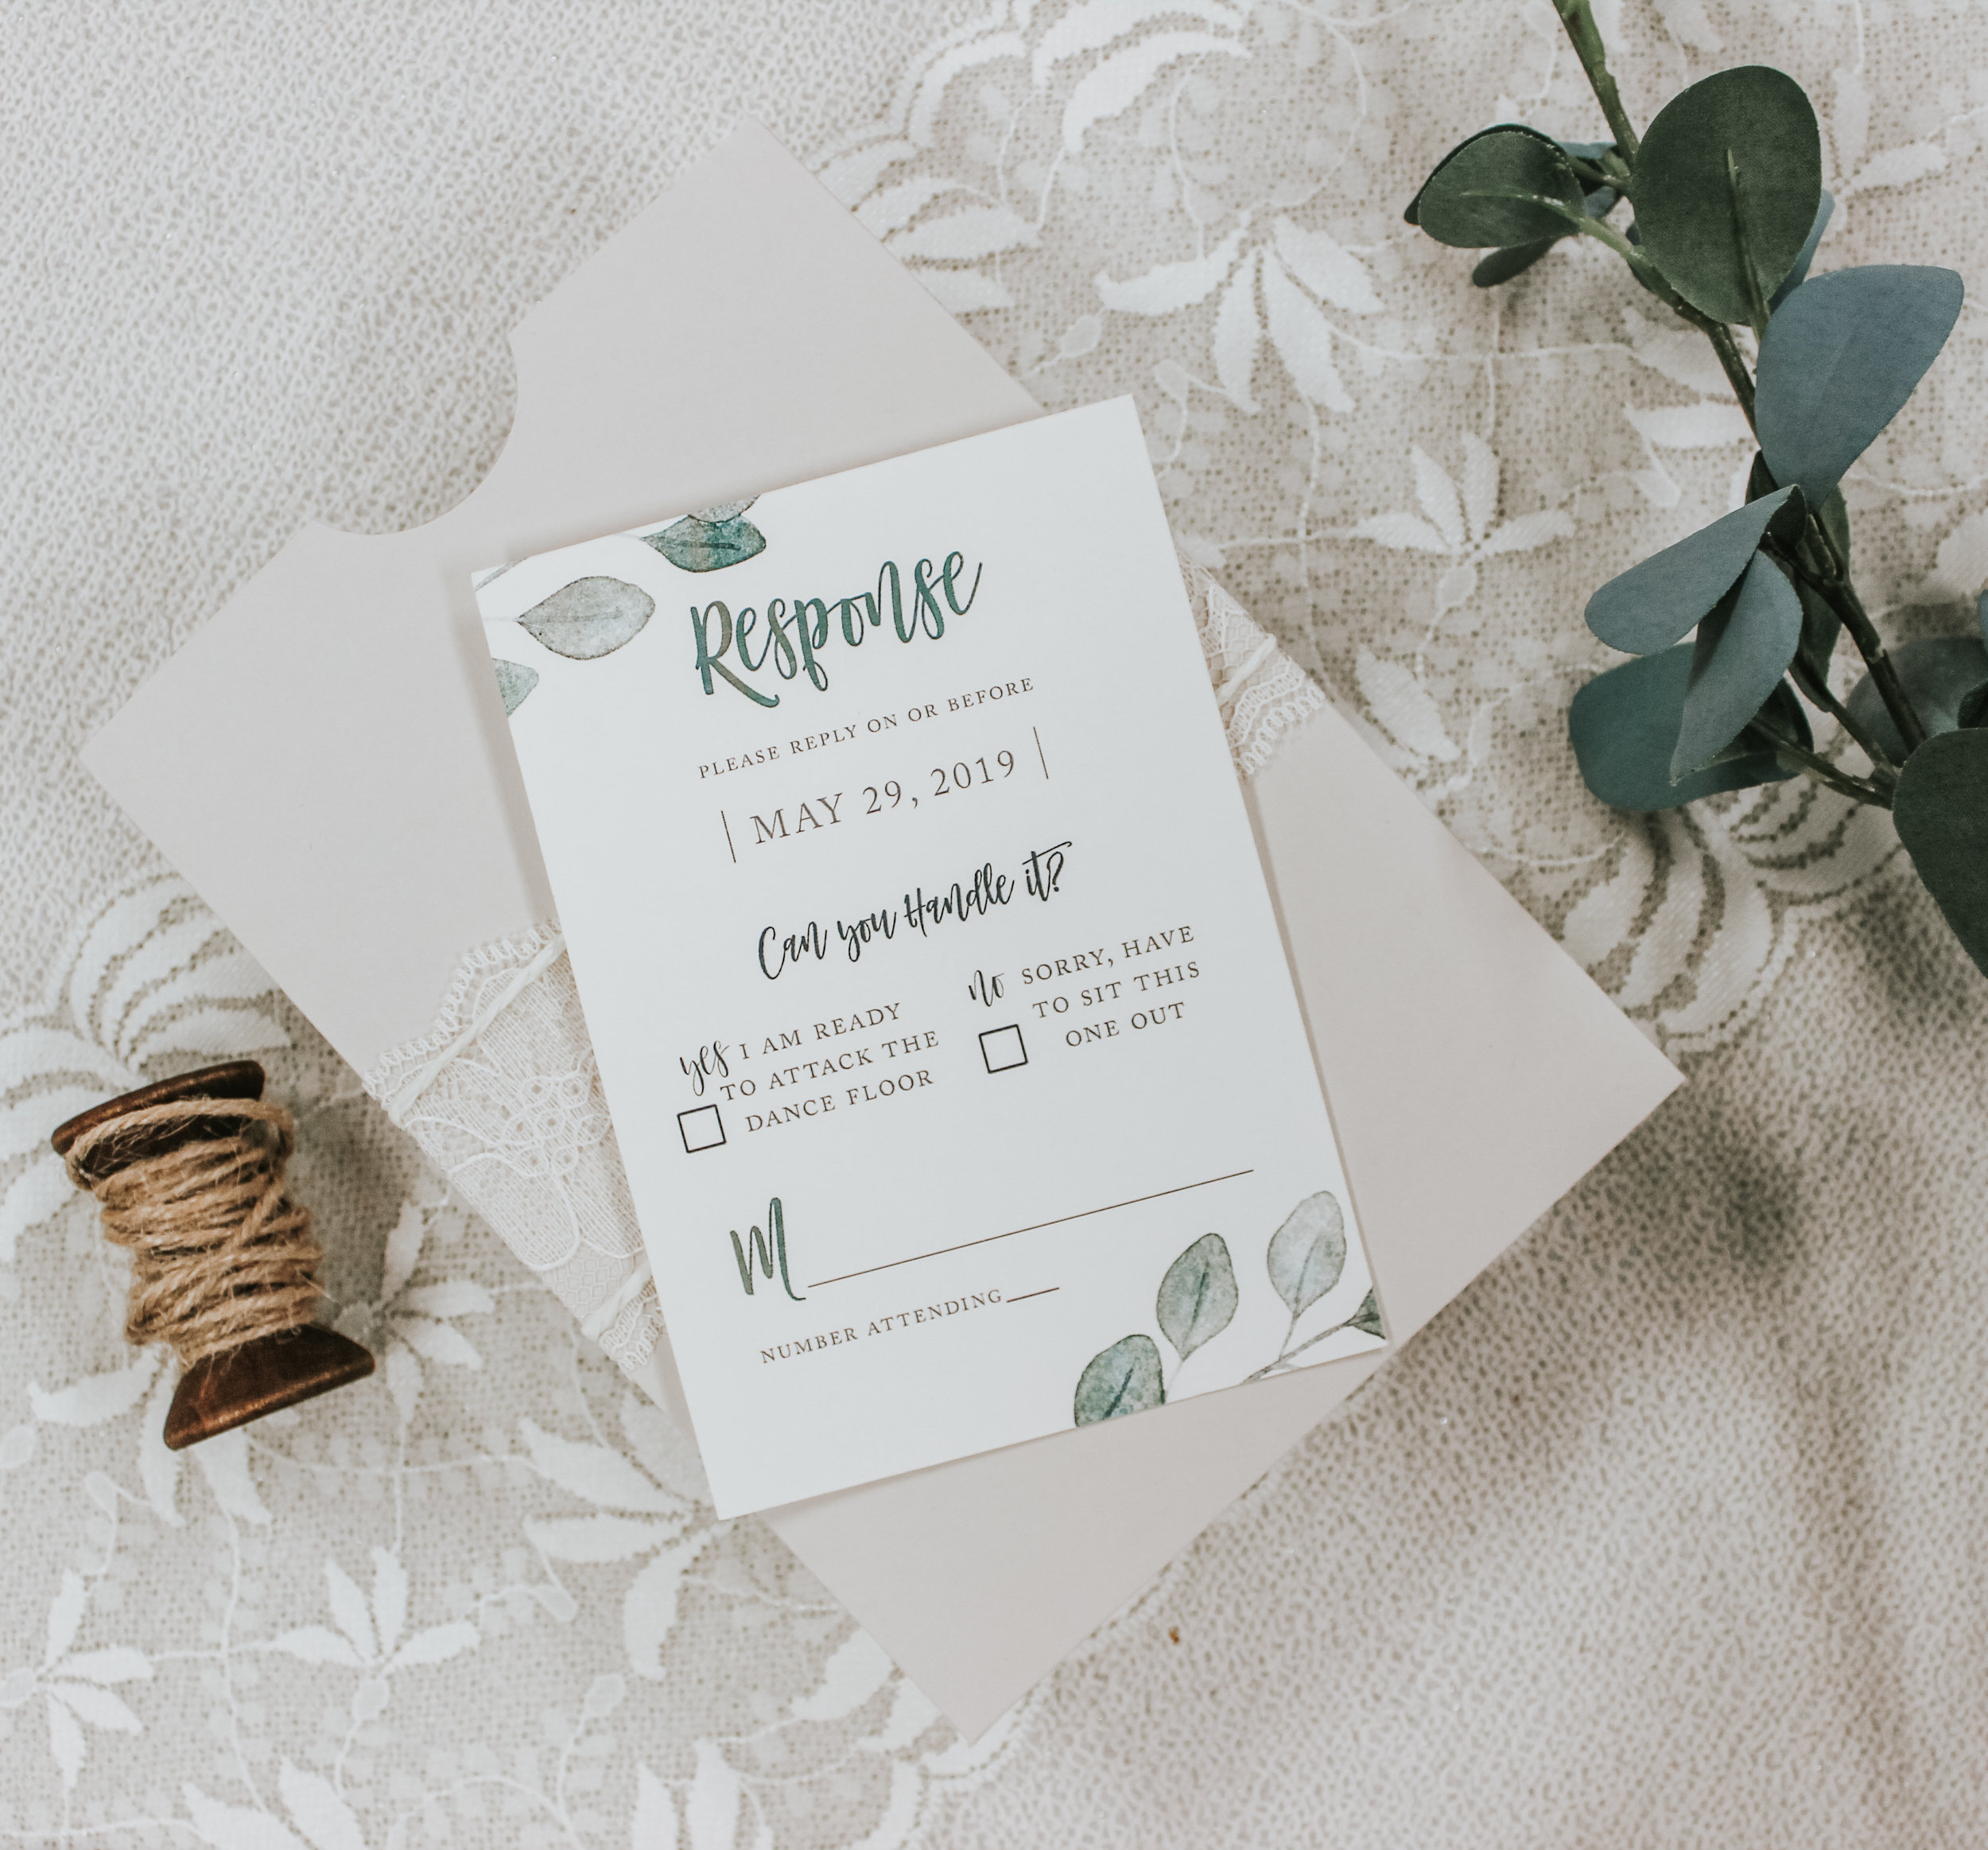 guests-say-yes-rsvp-card-inspiration-art-paper-scissors